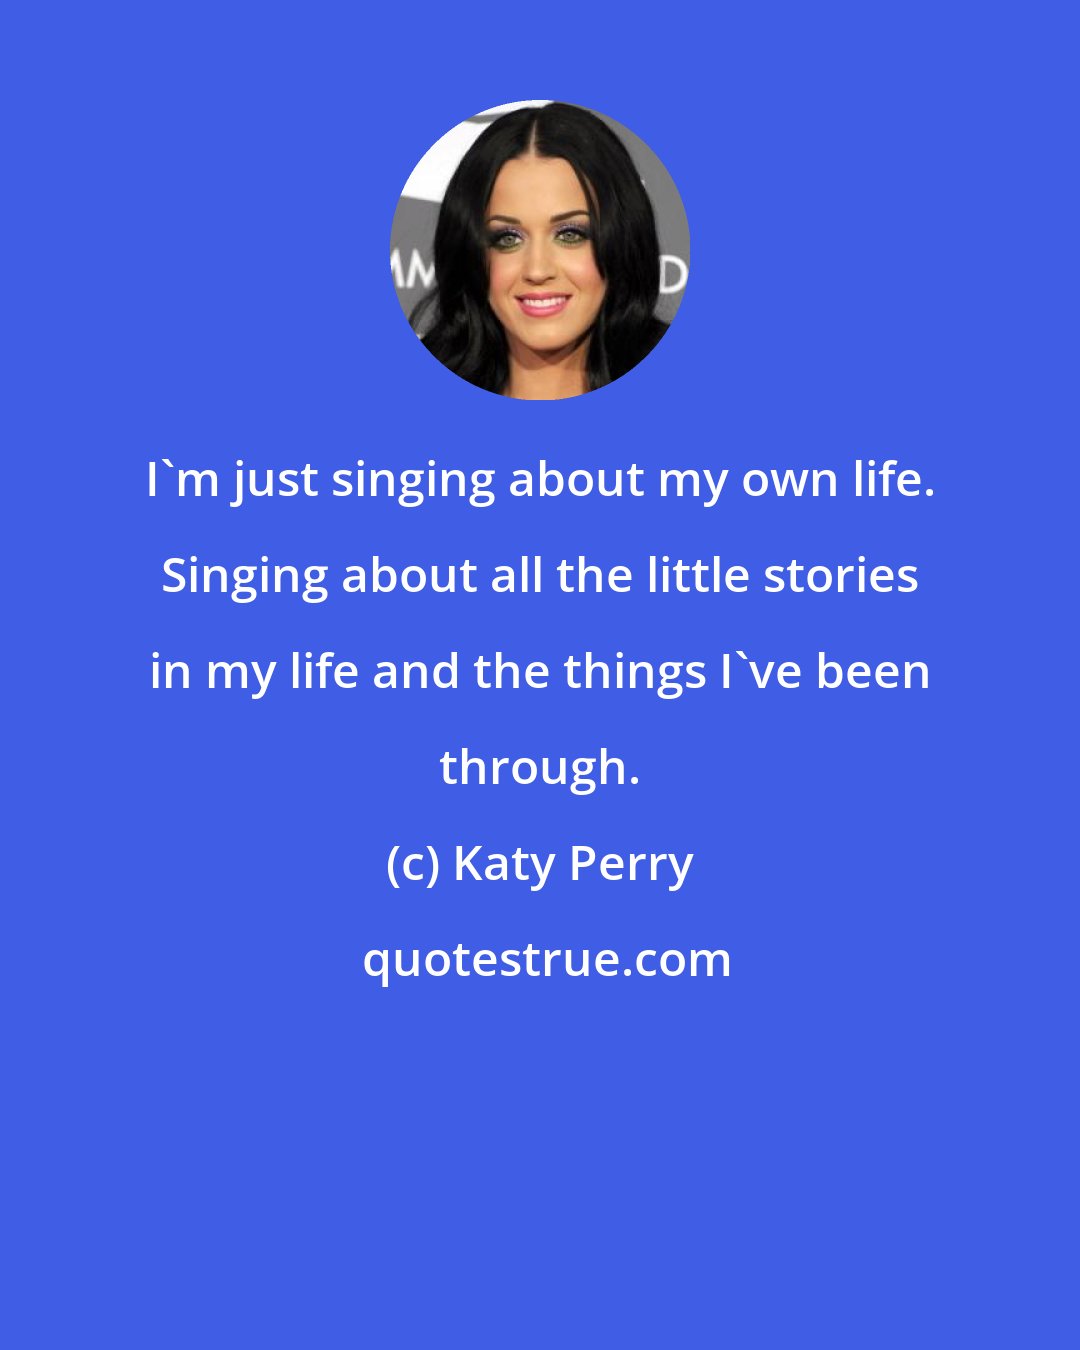 Katy Perry: I'm just singing about my own life. Singing about all the little stories in my life and the things I've been through.